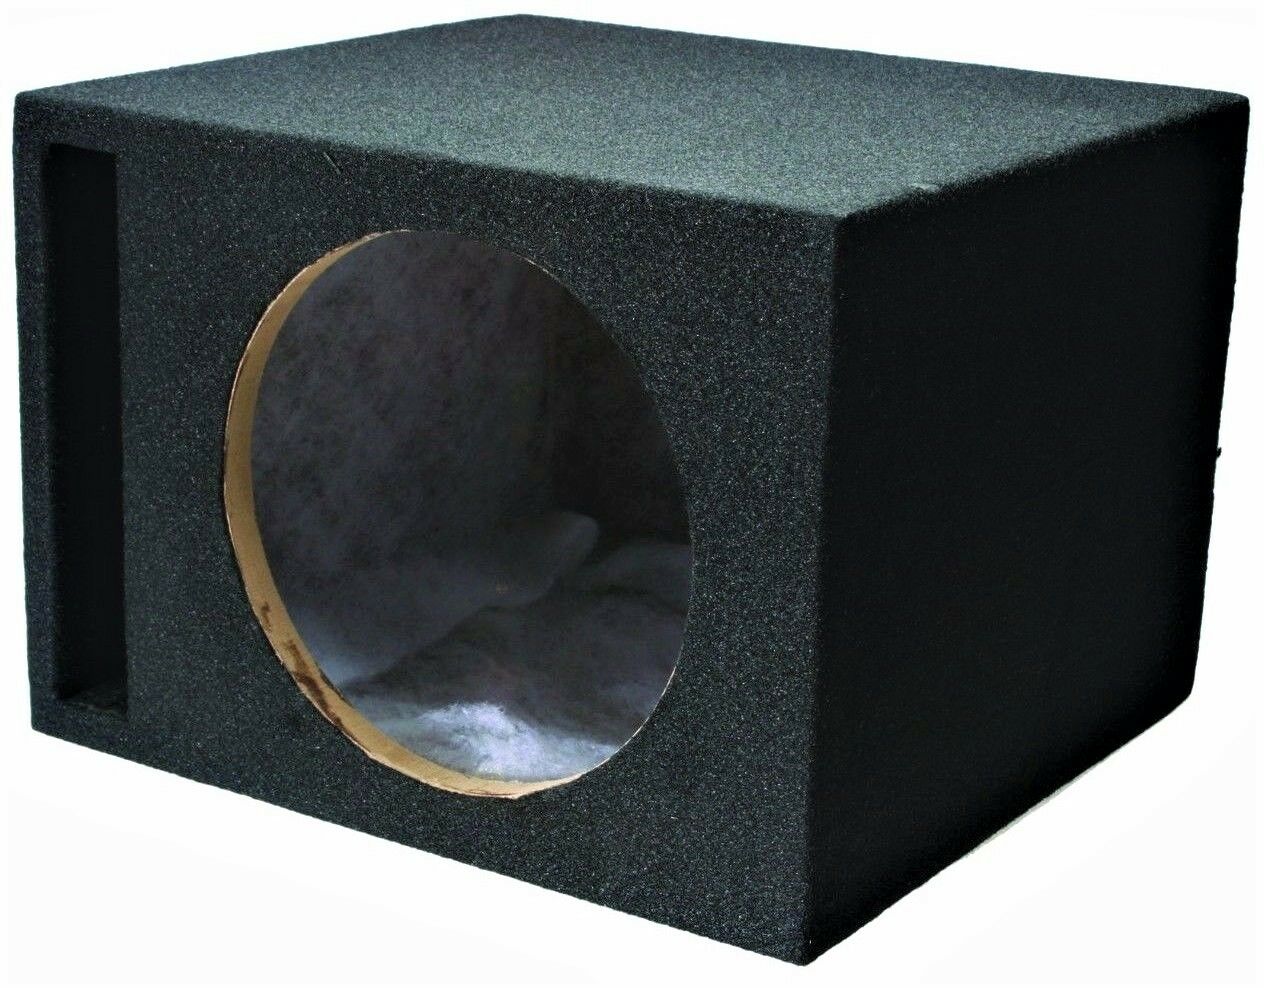 Absolute USA VEGS10 Single 10-Inch Slot Vented Ported Subwoofer Enclosure